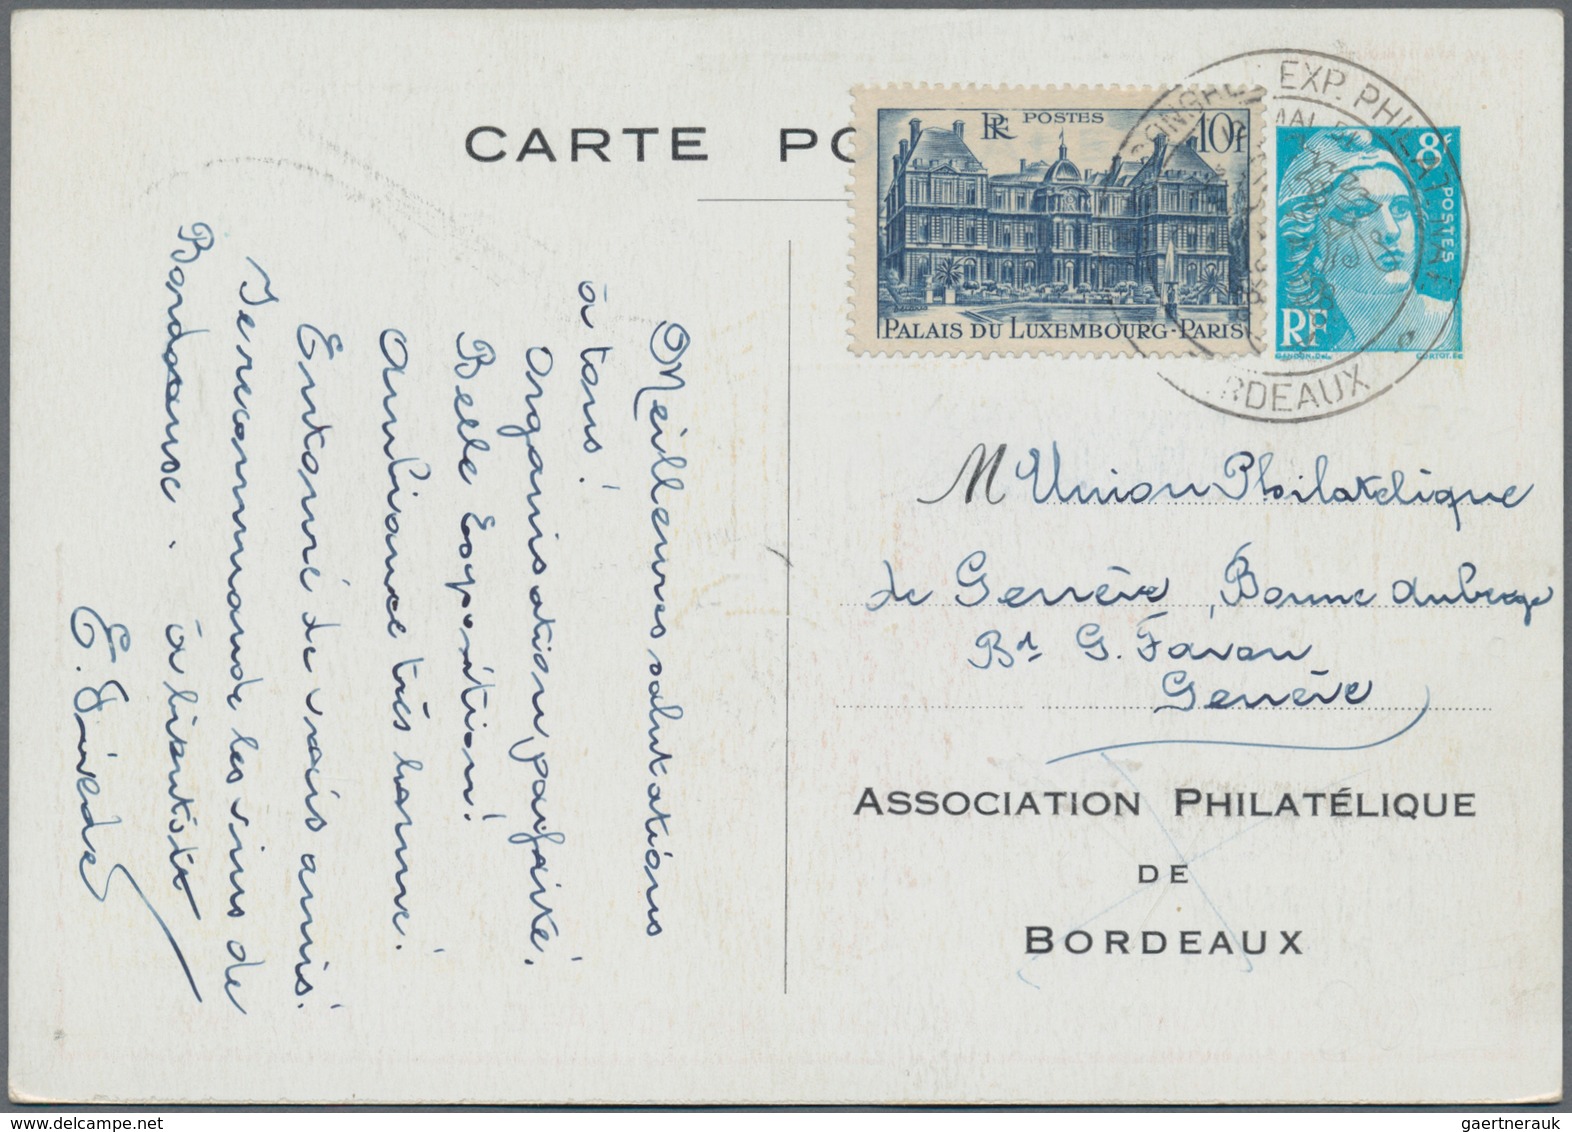 Frankreich: 1852/1940 accumulation of ca. 290 letters (mostly classic until 1875), cards and postal